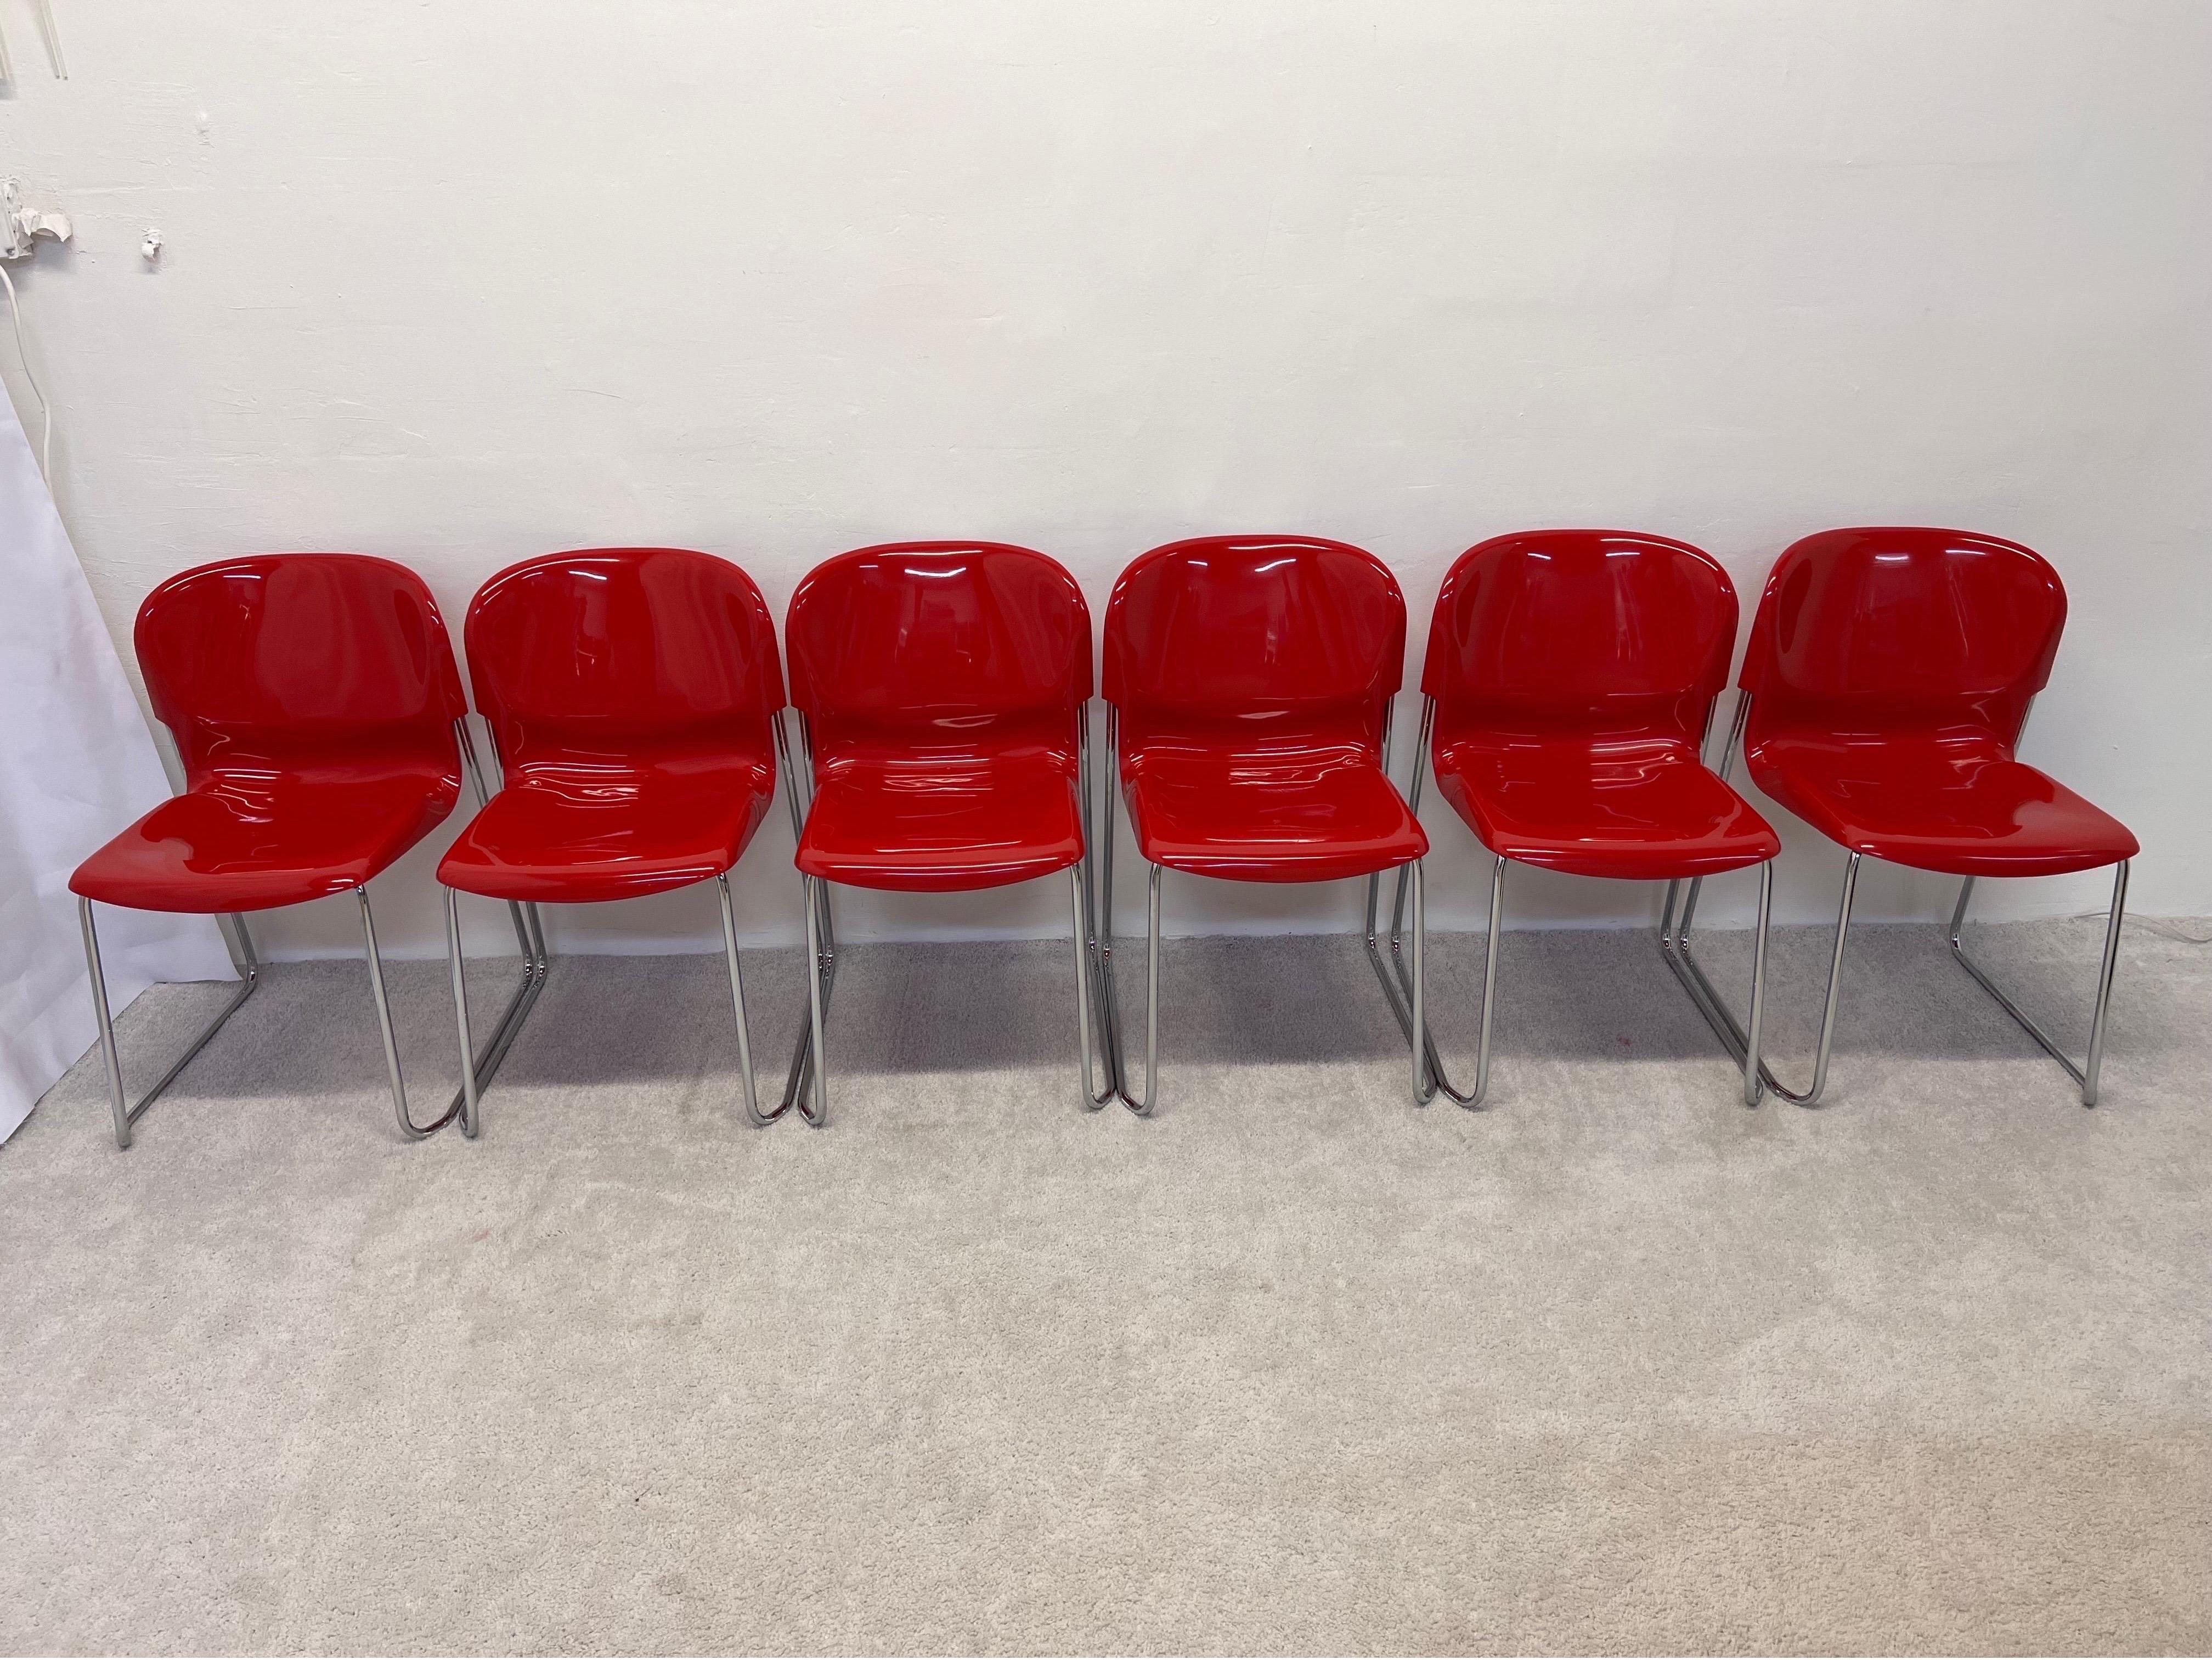 Set of six stackable dining chairs with glossy red moulded plastic seats on tubular chrome legs designed by Gerd Lange for Atelier International, 1980s. Originally designed in the 1960s, this set was produced in the 1980s by Atelier International